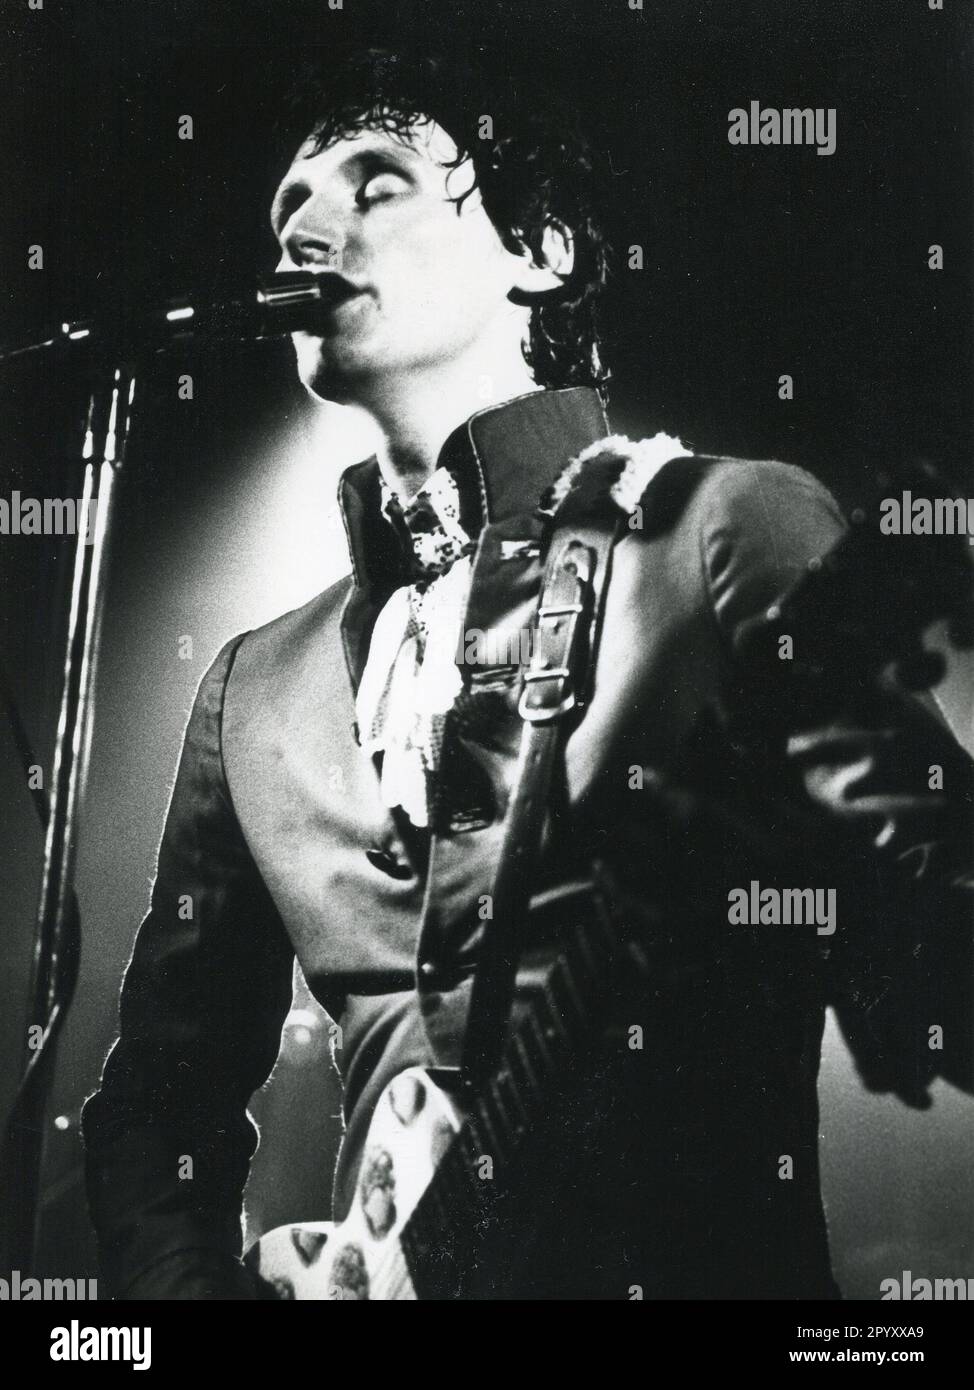 Patrick Collier, lead singer of British power pop band The Boyfriends, performs in London on July 14, 1978. Stock Photo